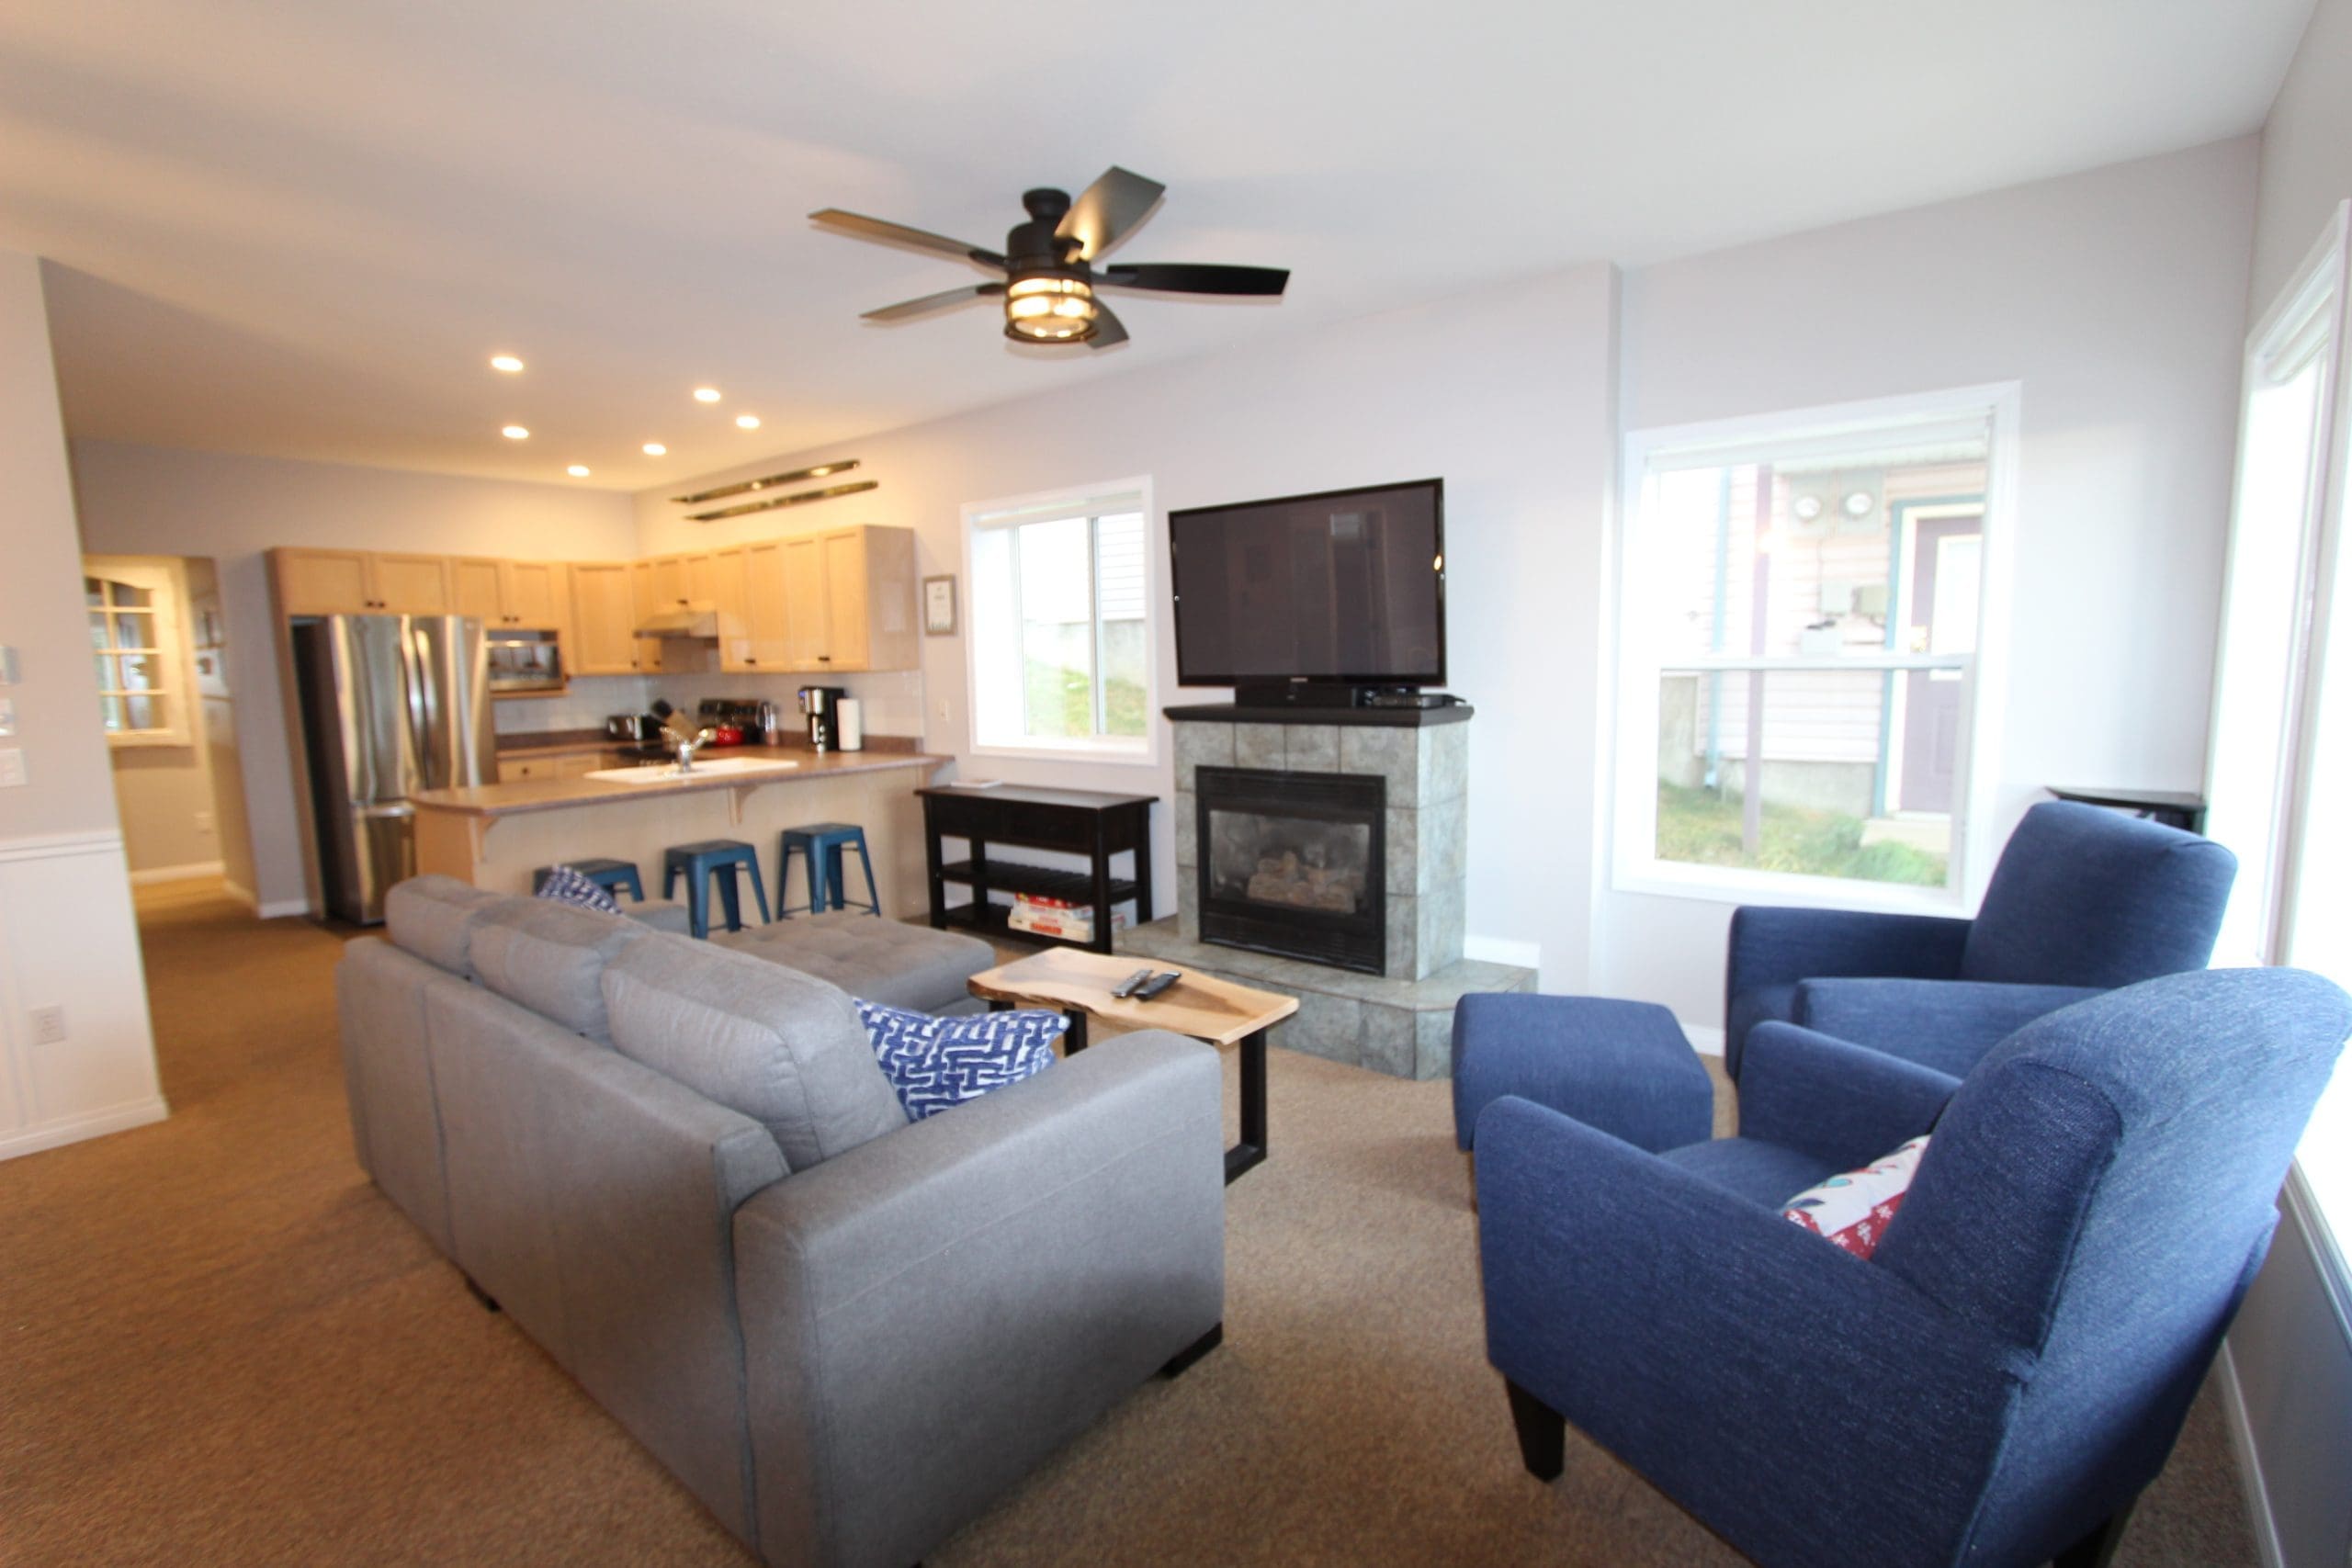 Living room of newly renovated 2 bedroom suite backing onto the Alpine Meadows chairlift. Ski right out from your backyard to start the day, and a quick walk to the village. Gas fireplace, TV, BBQ, private hot tub, private laundry and boot/ski room.